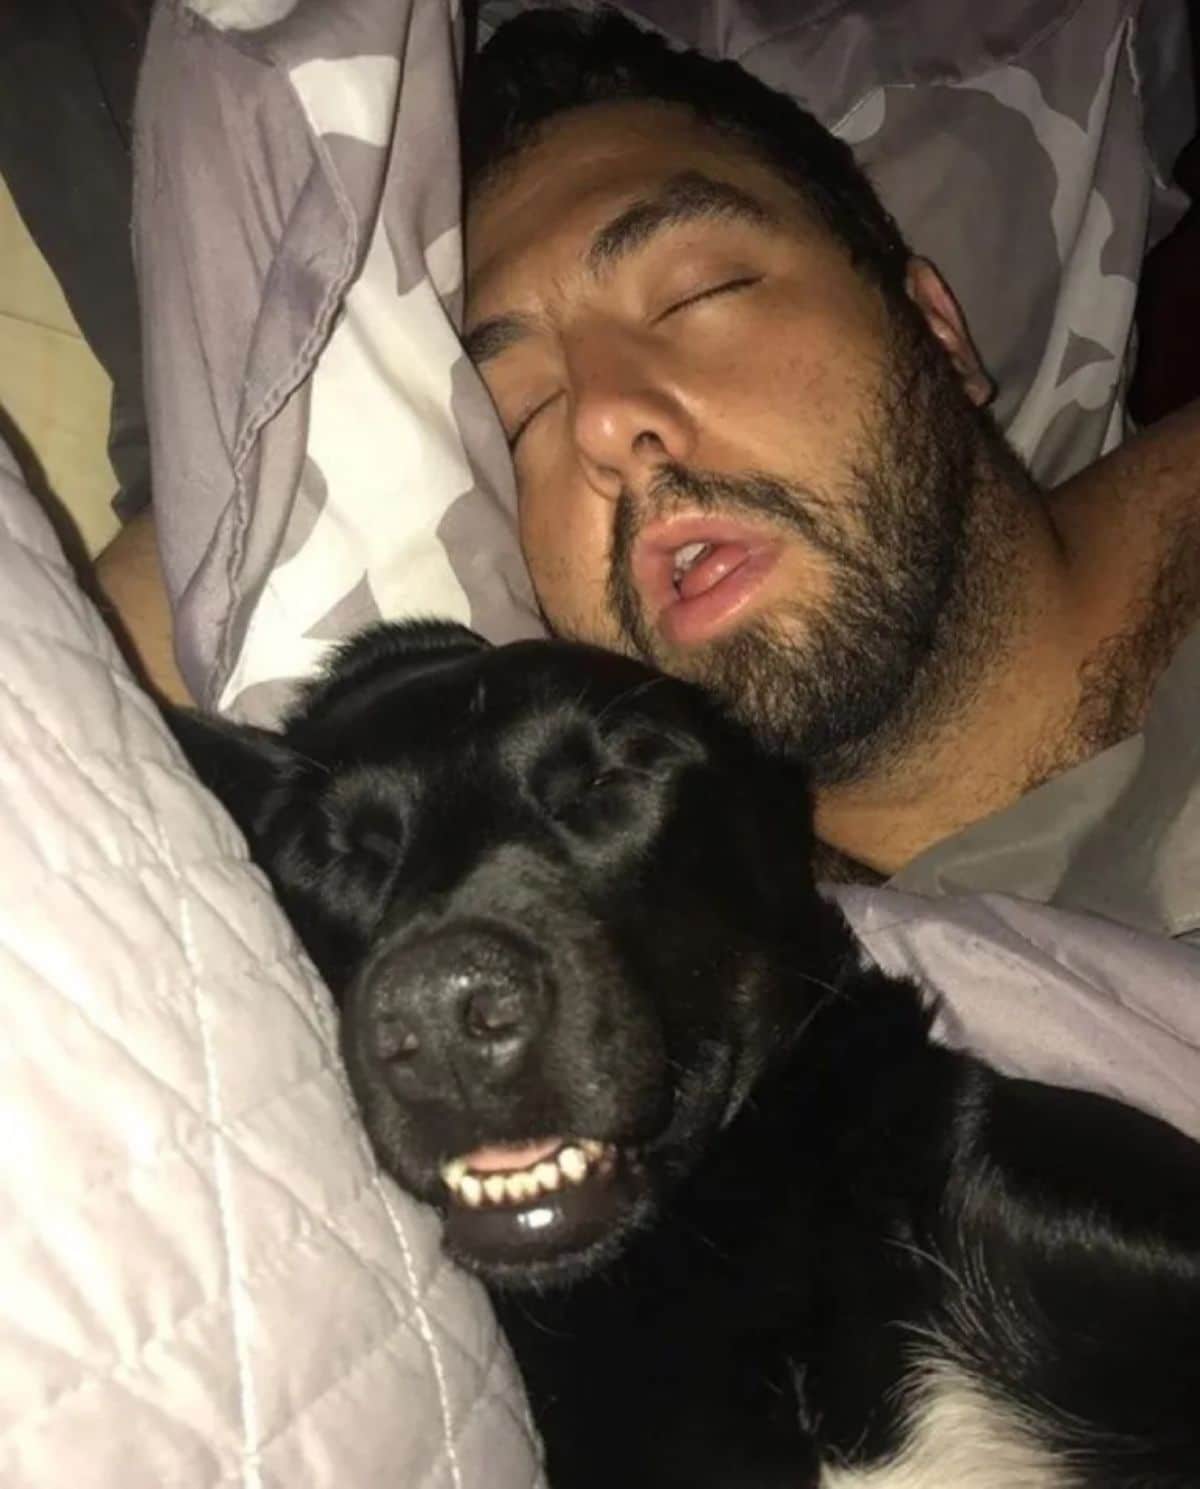 sleeping black dog with the mouth open and a man sleeping with his mouth open